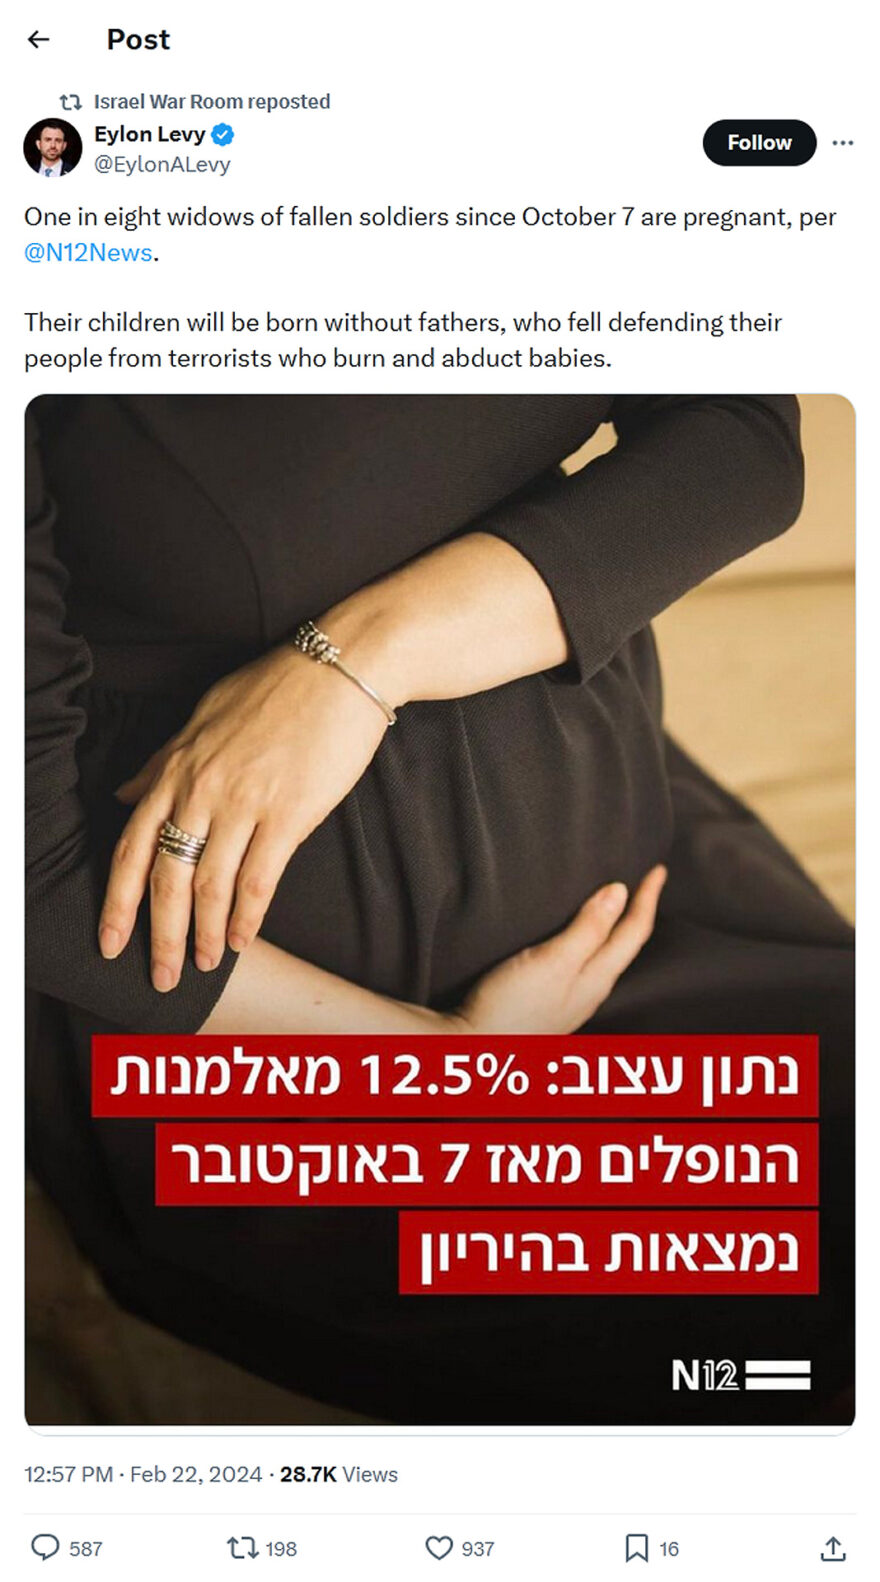 Eylon Levy-tweet-22February2024-One in eight widows of fallen soldiers since October 7 are pregnant